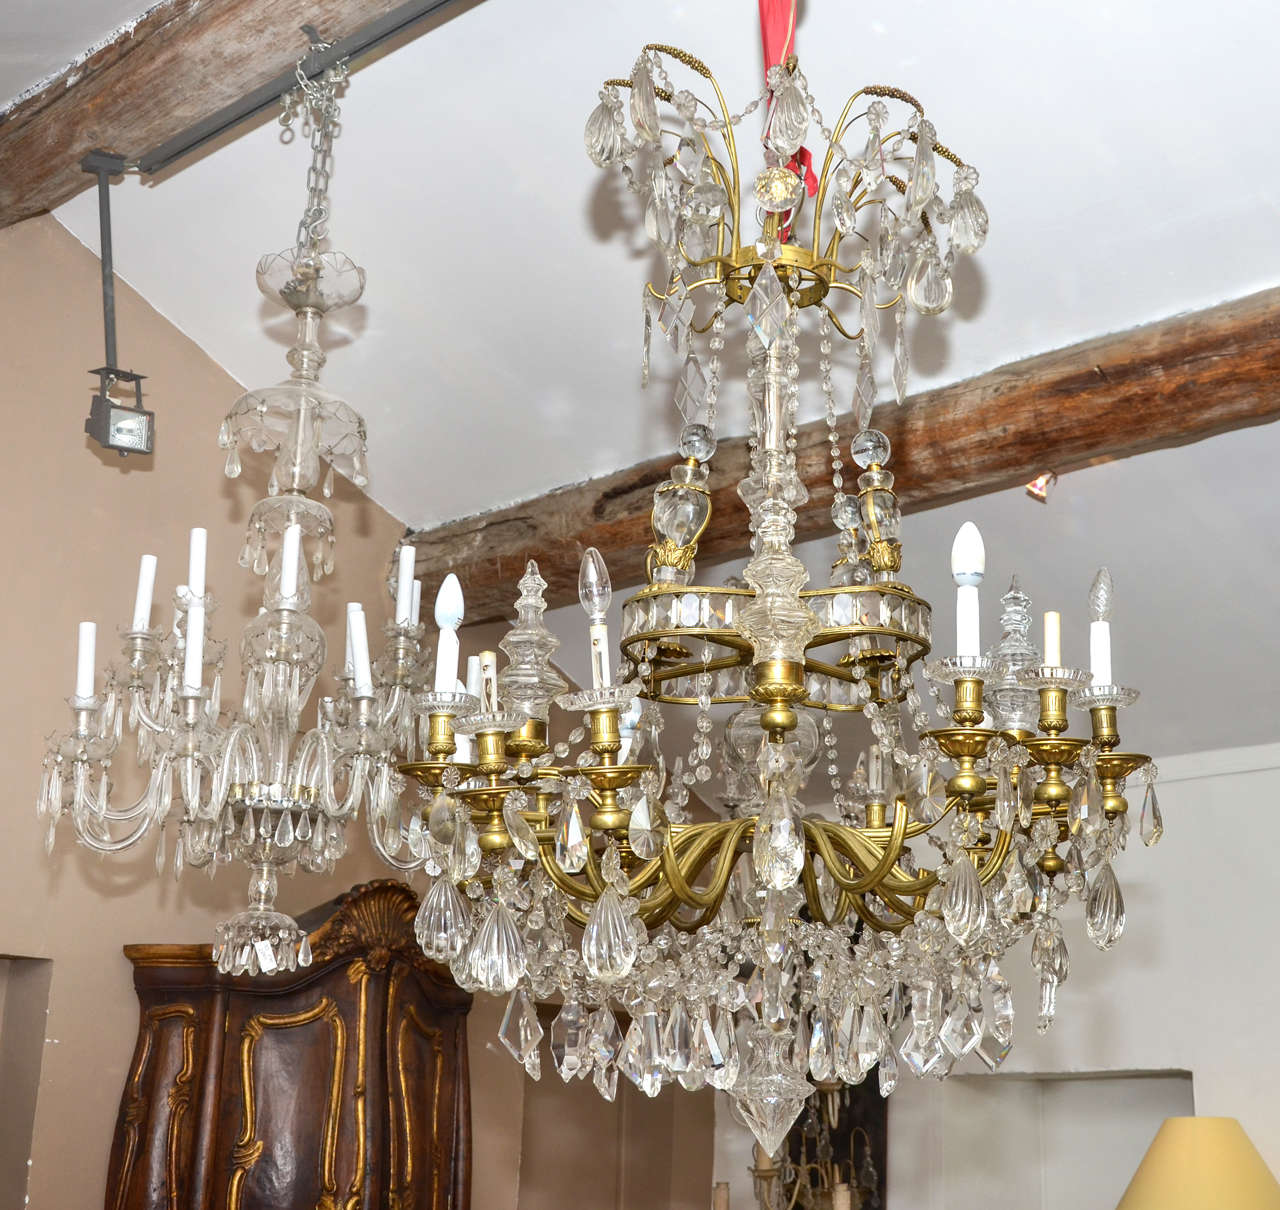 fantastic chandelier style marie antoinette

in bronze and crystal